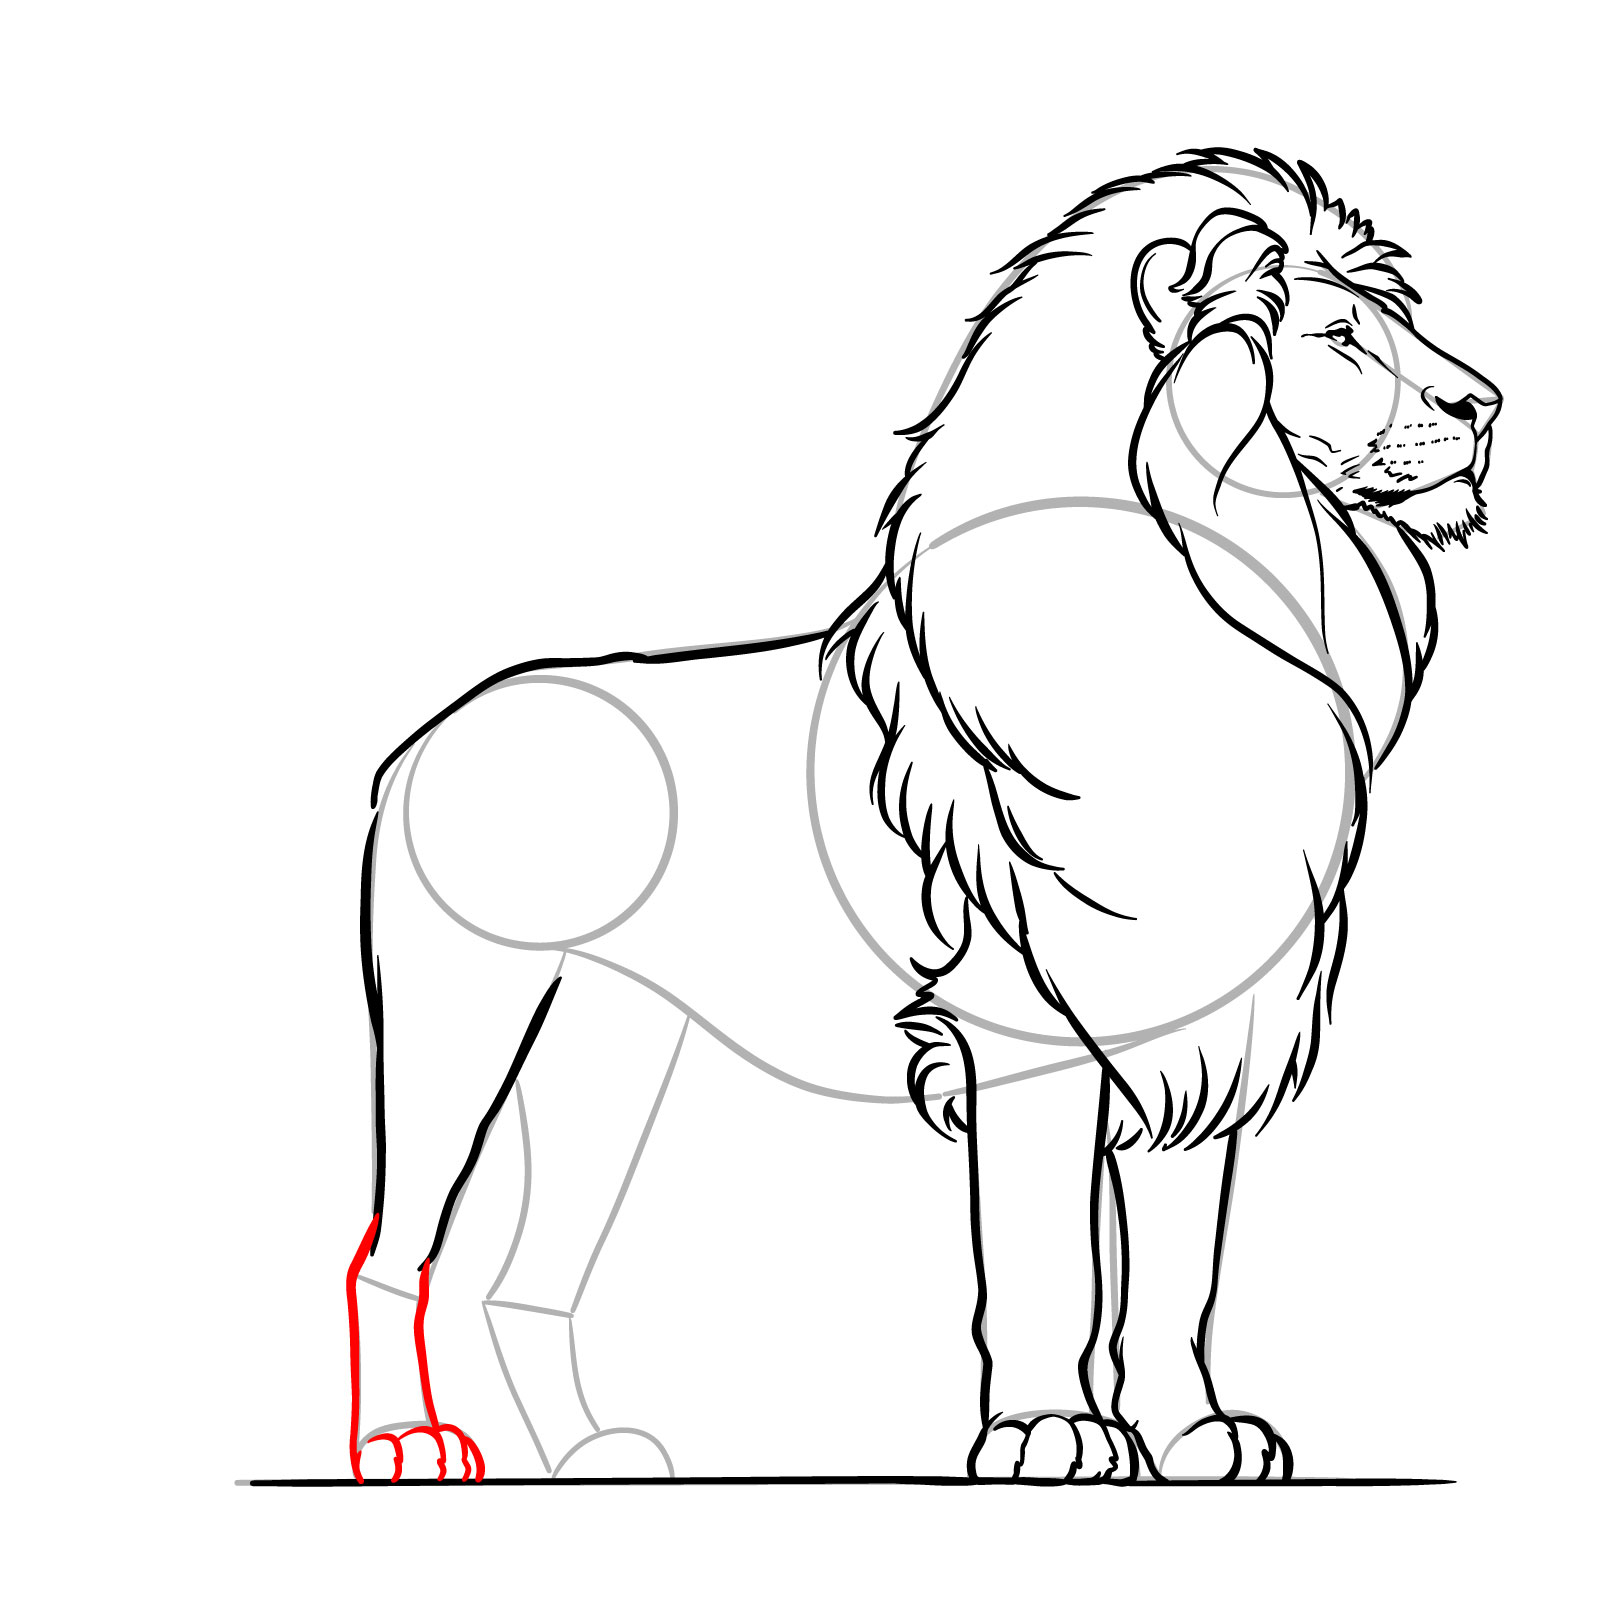 Completing the rear right leg in a standing lion drawing - step 15